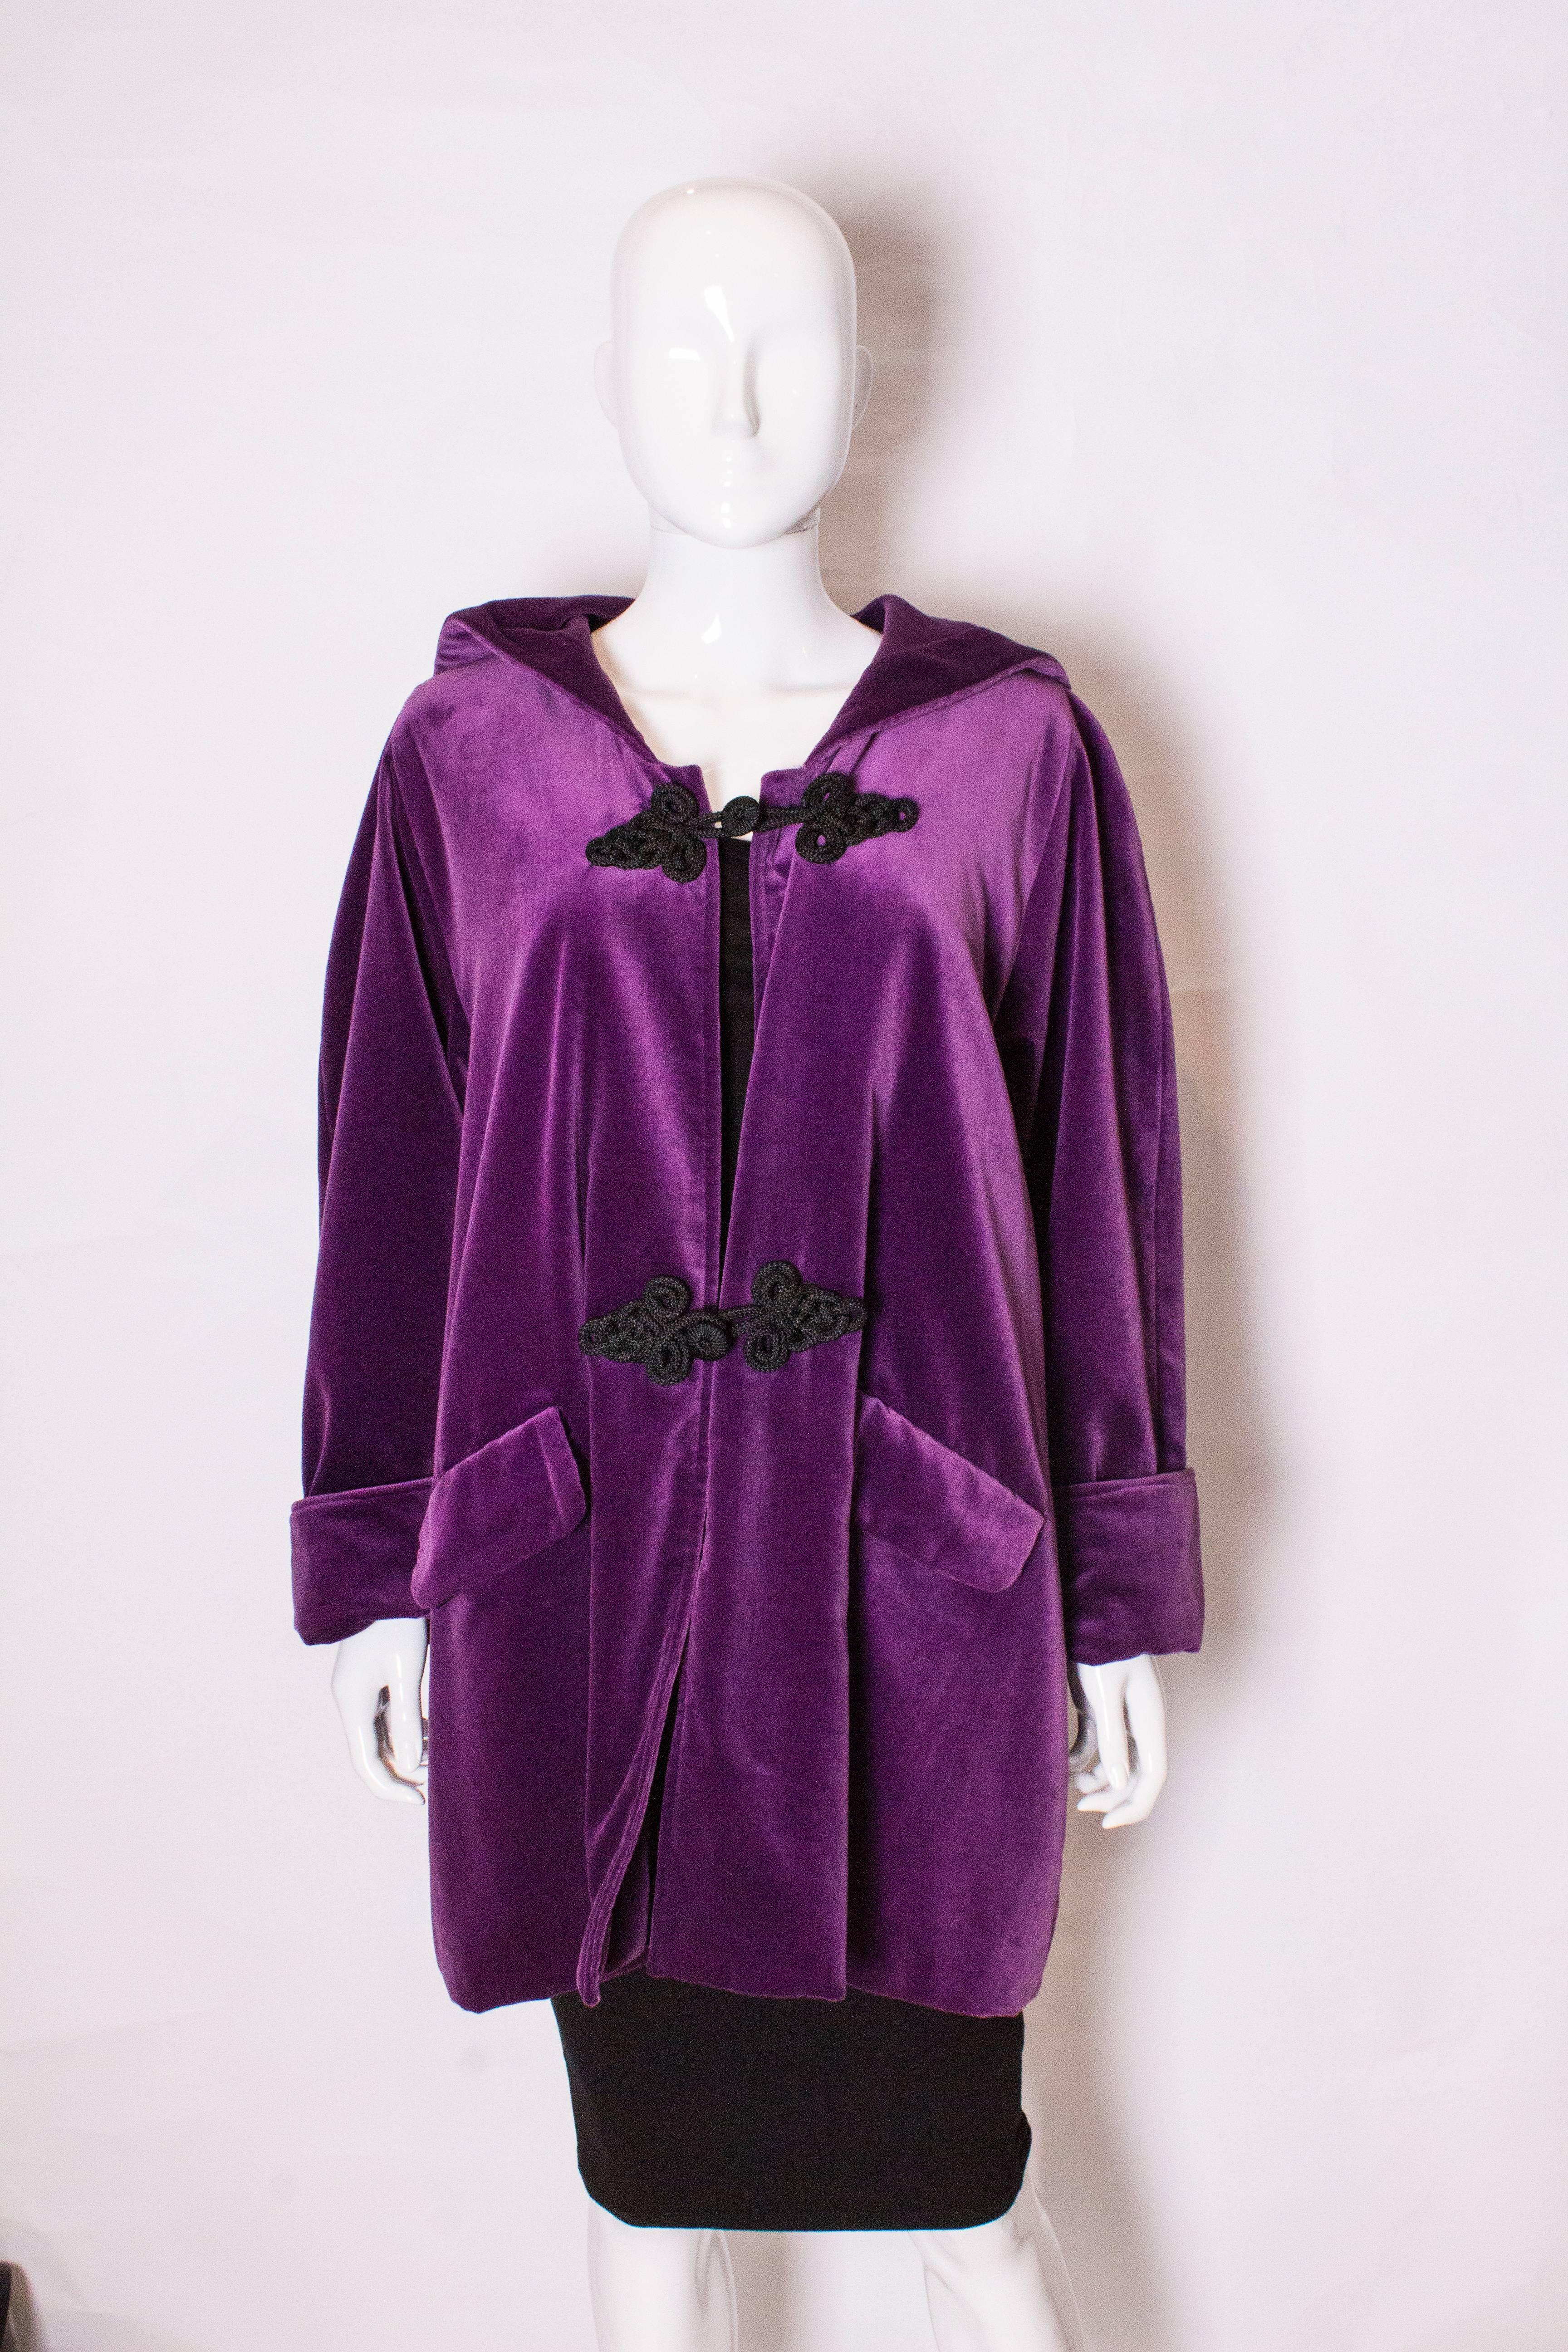 A great , hooded purple velvet jacket by Maribou London. 
The jacket is fully lined and has two pockets at the front and black frogging.